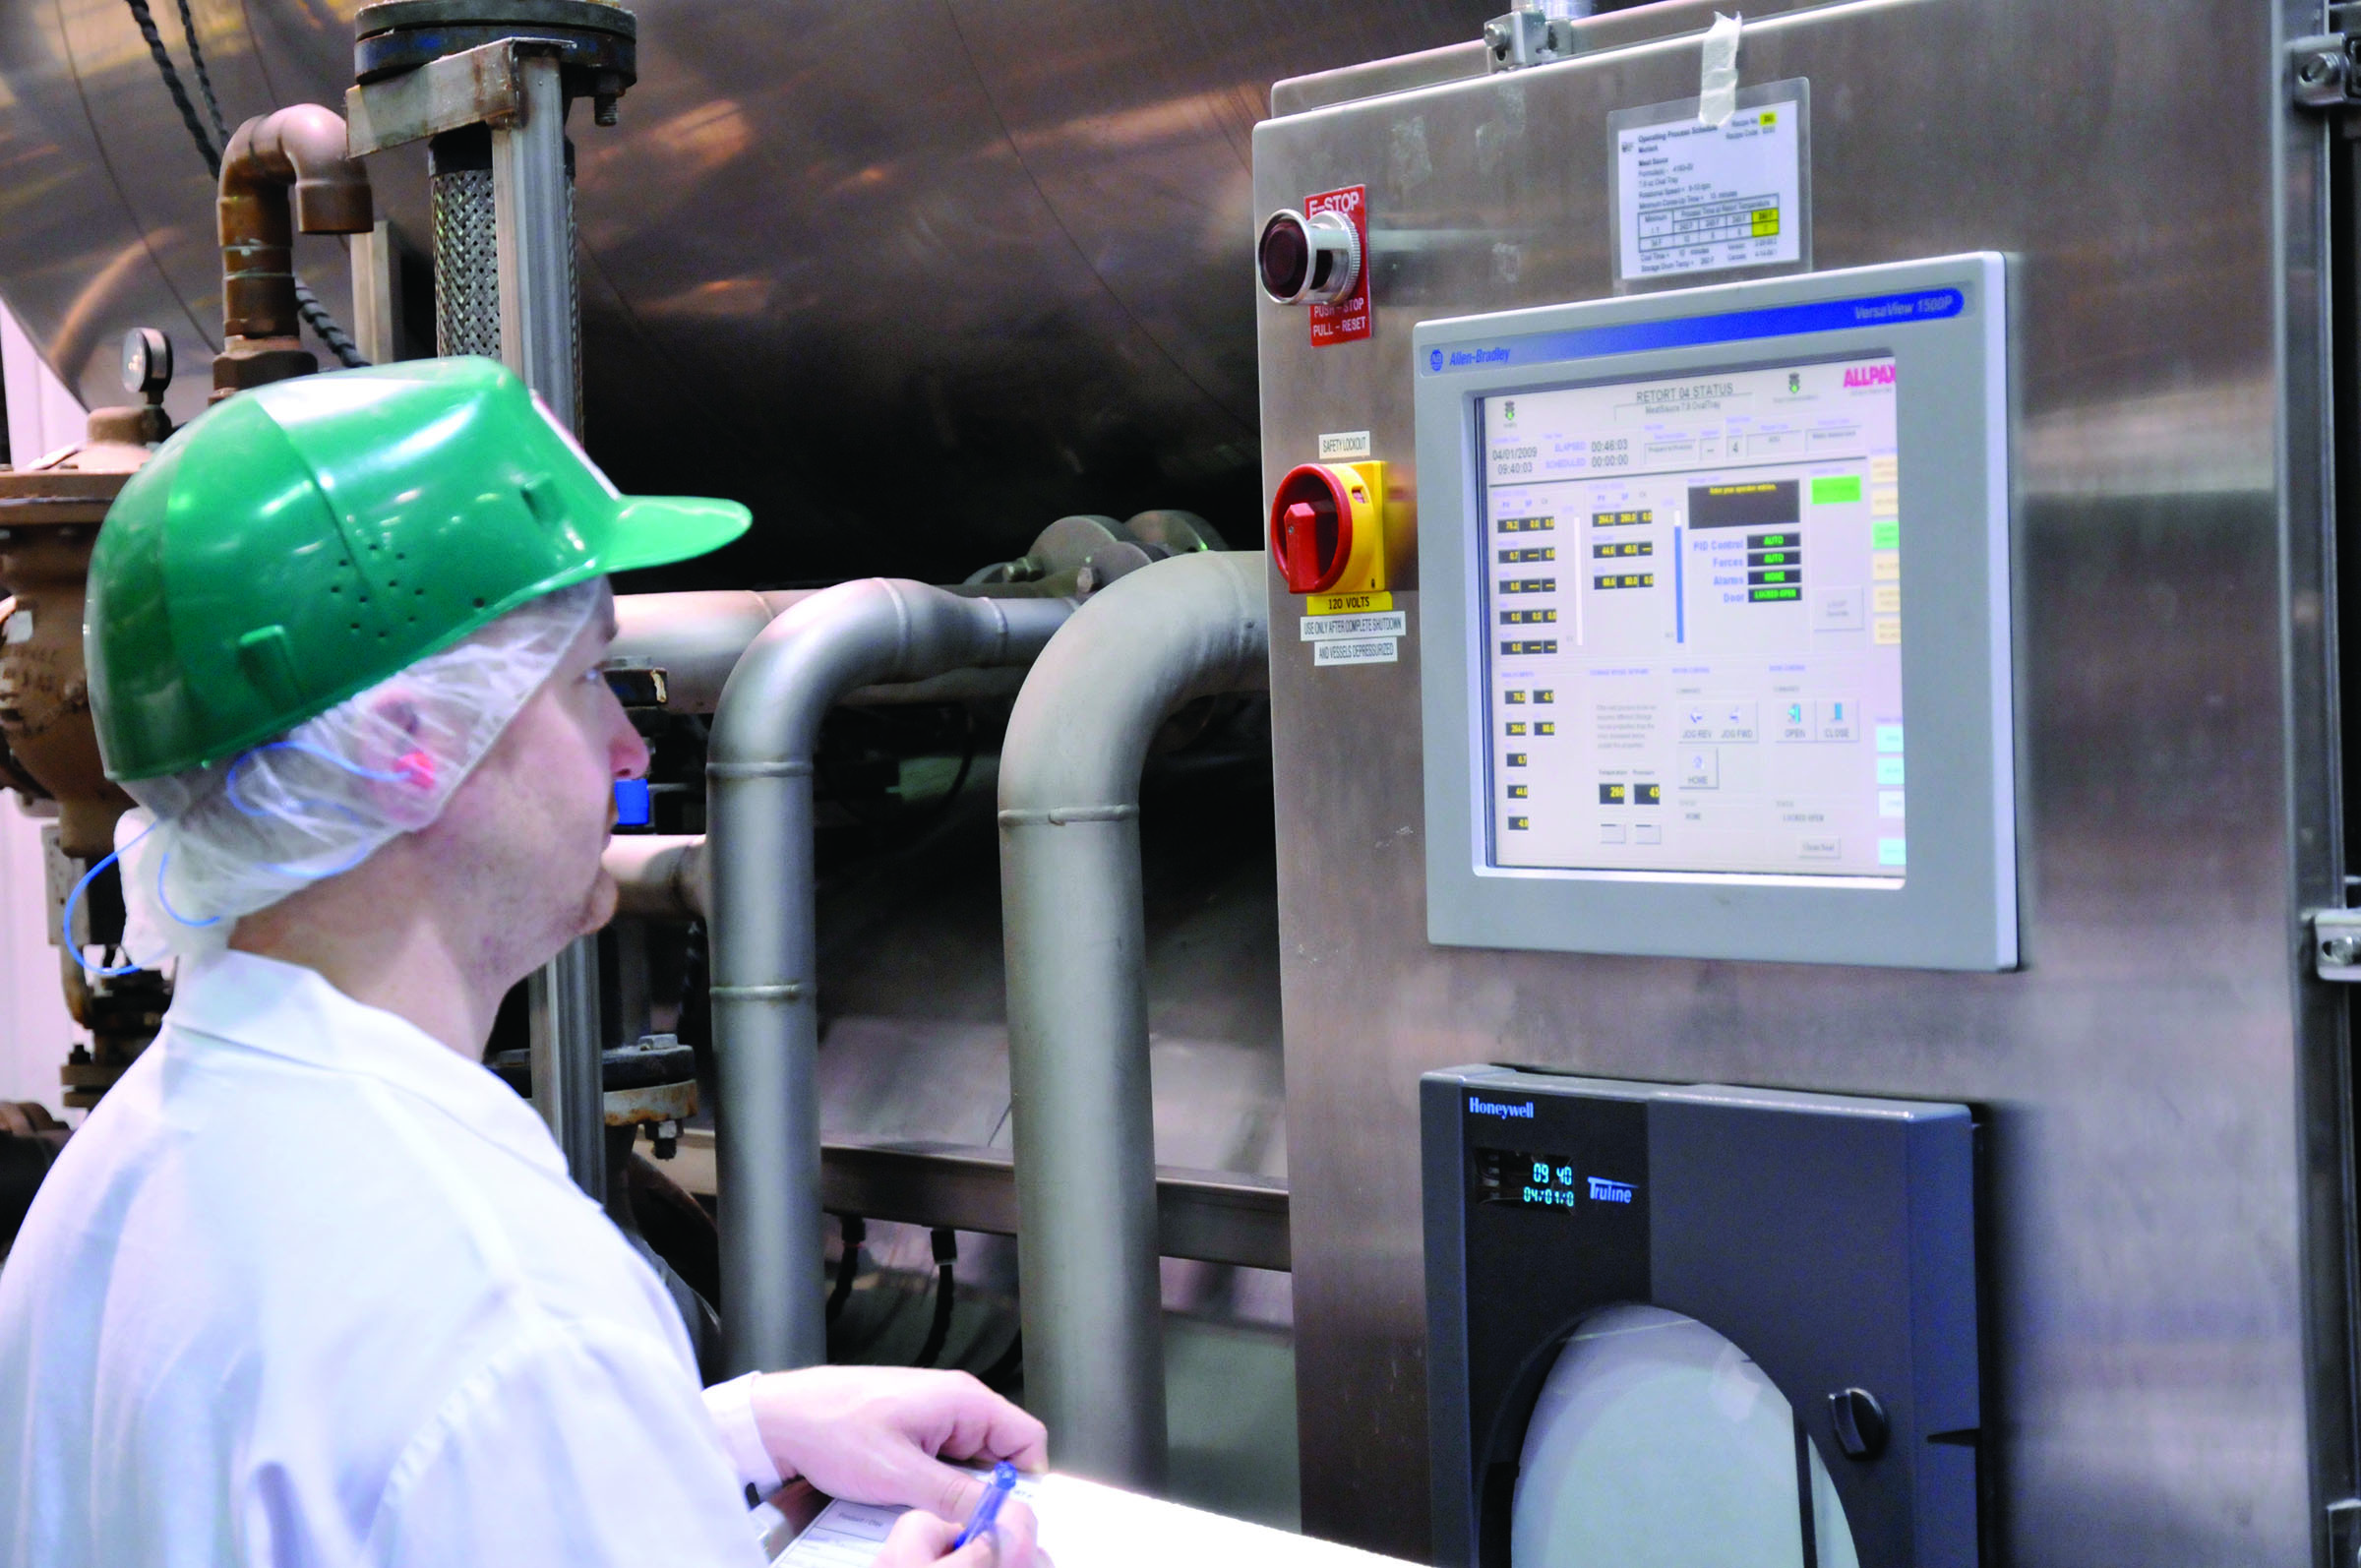 Modern operator interfaces allow the plant to execute flexible control of their equipment